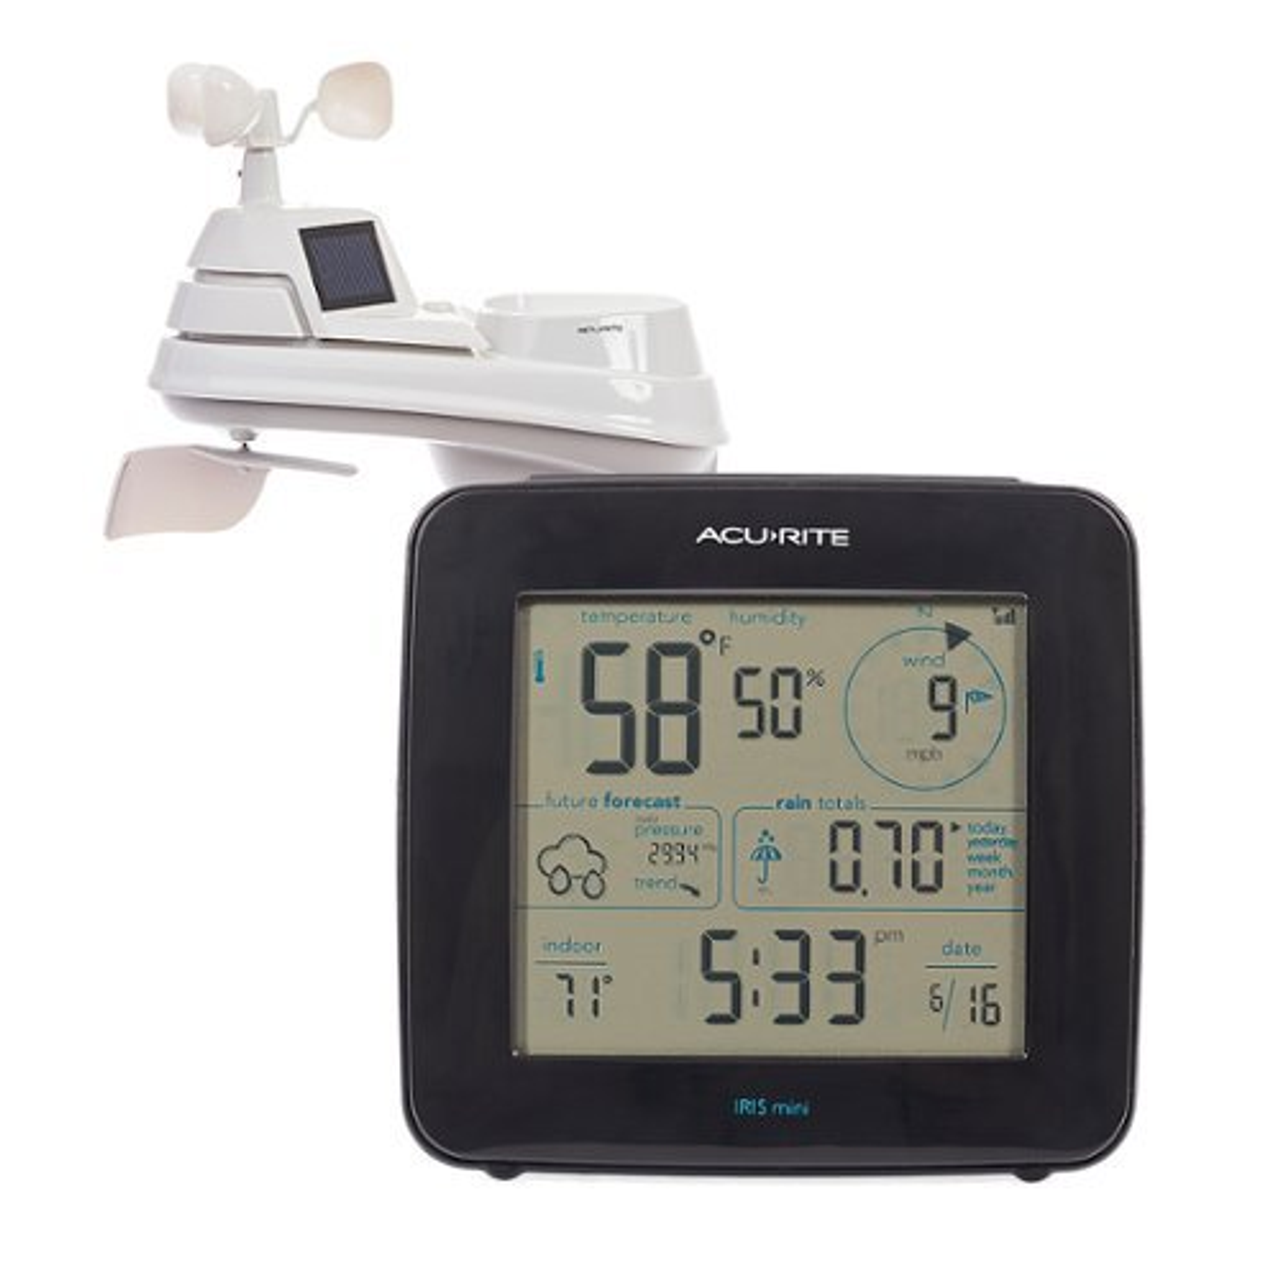 AcuRite Iris (5-in-1) Weather Station with Wireless Monochrome Display for Hyperlocal Weather Forecasting